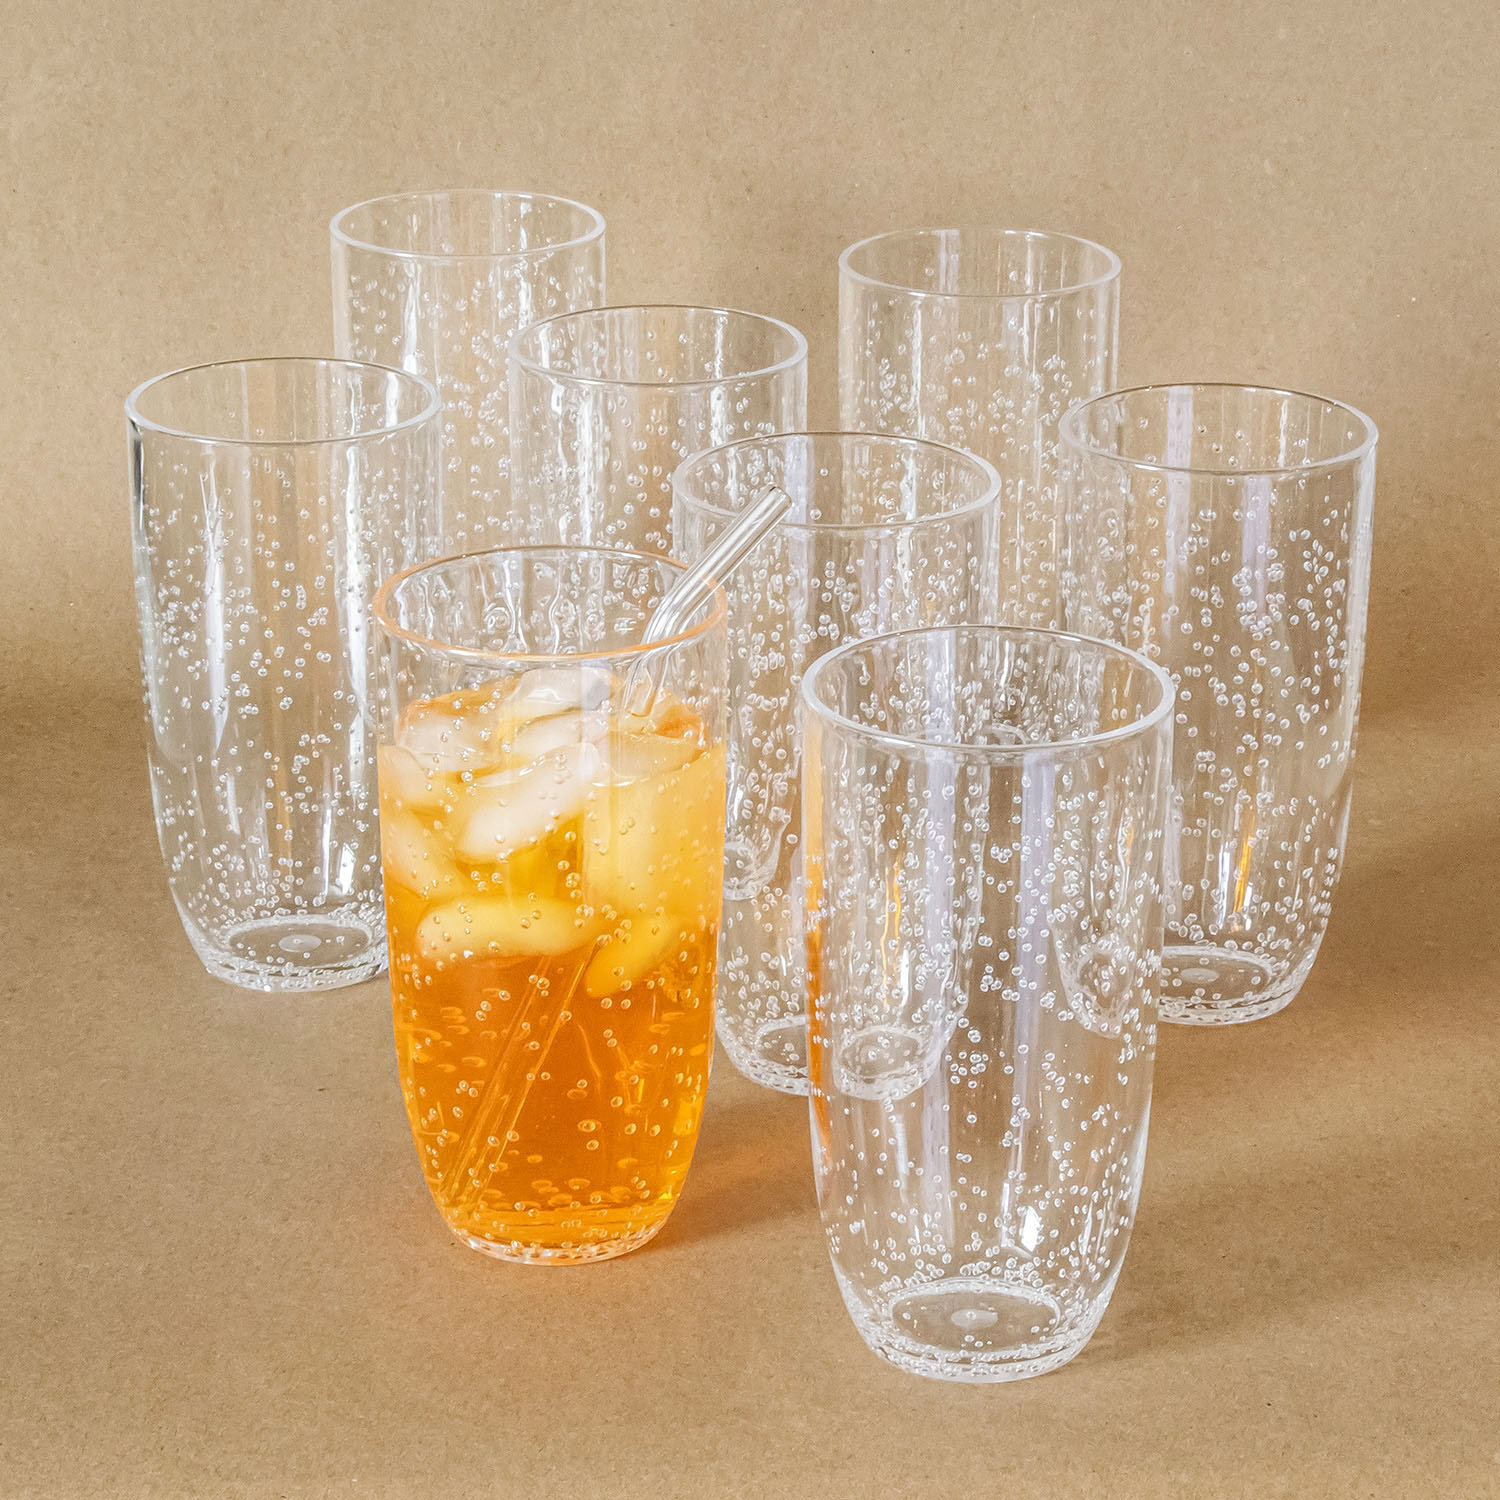 Artisan Crafted Hand Blown Glass Tumblers,Colored Bubble Water Glasses,8.5  OZ of